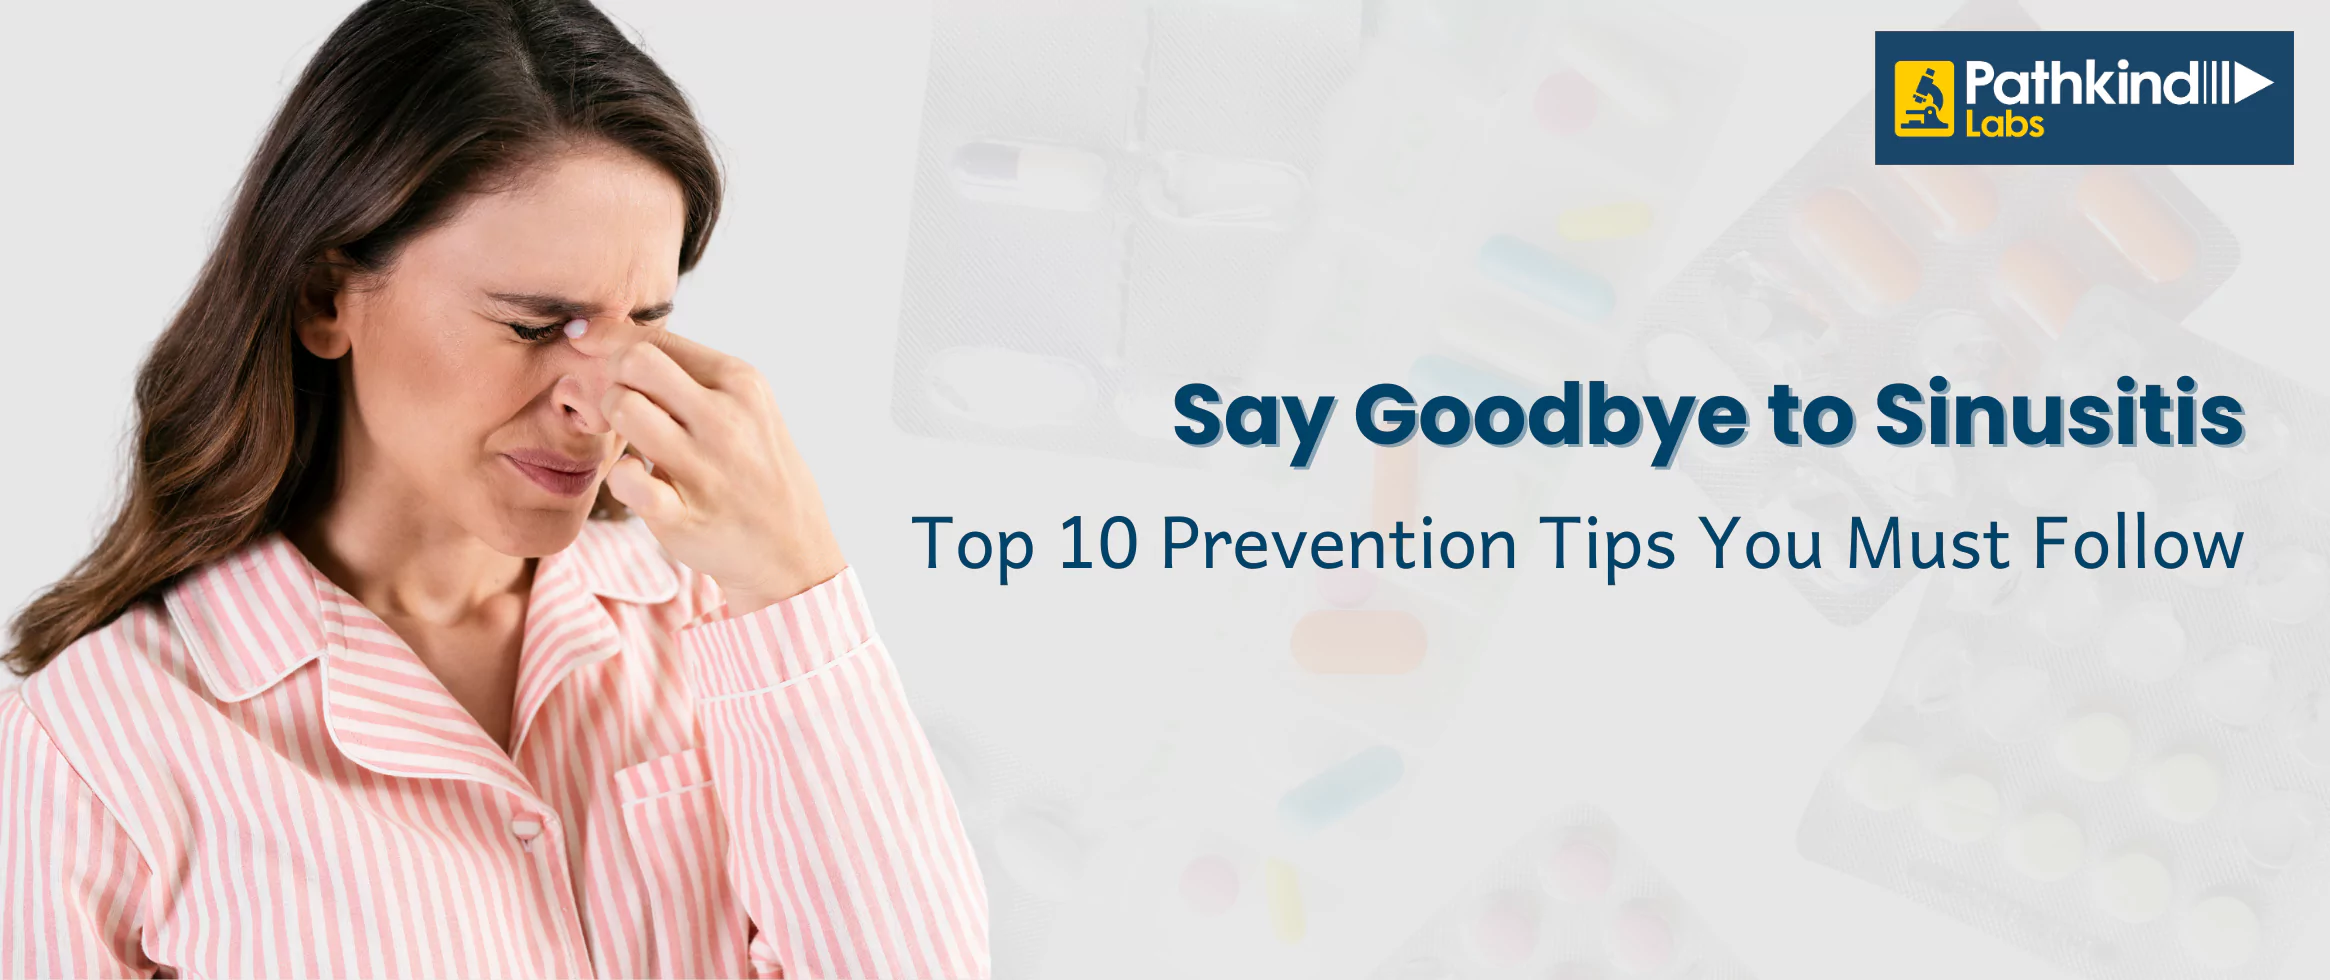  Say Goodbye to Sinusitis: Top 10 Prevention Tips You Must Follow